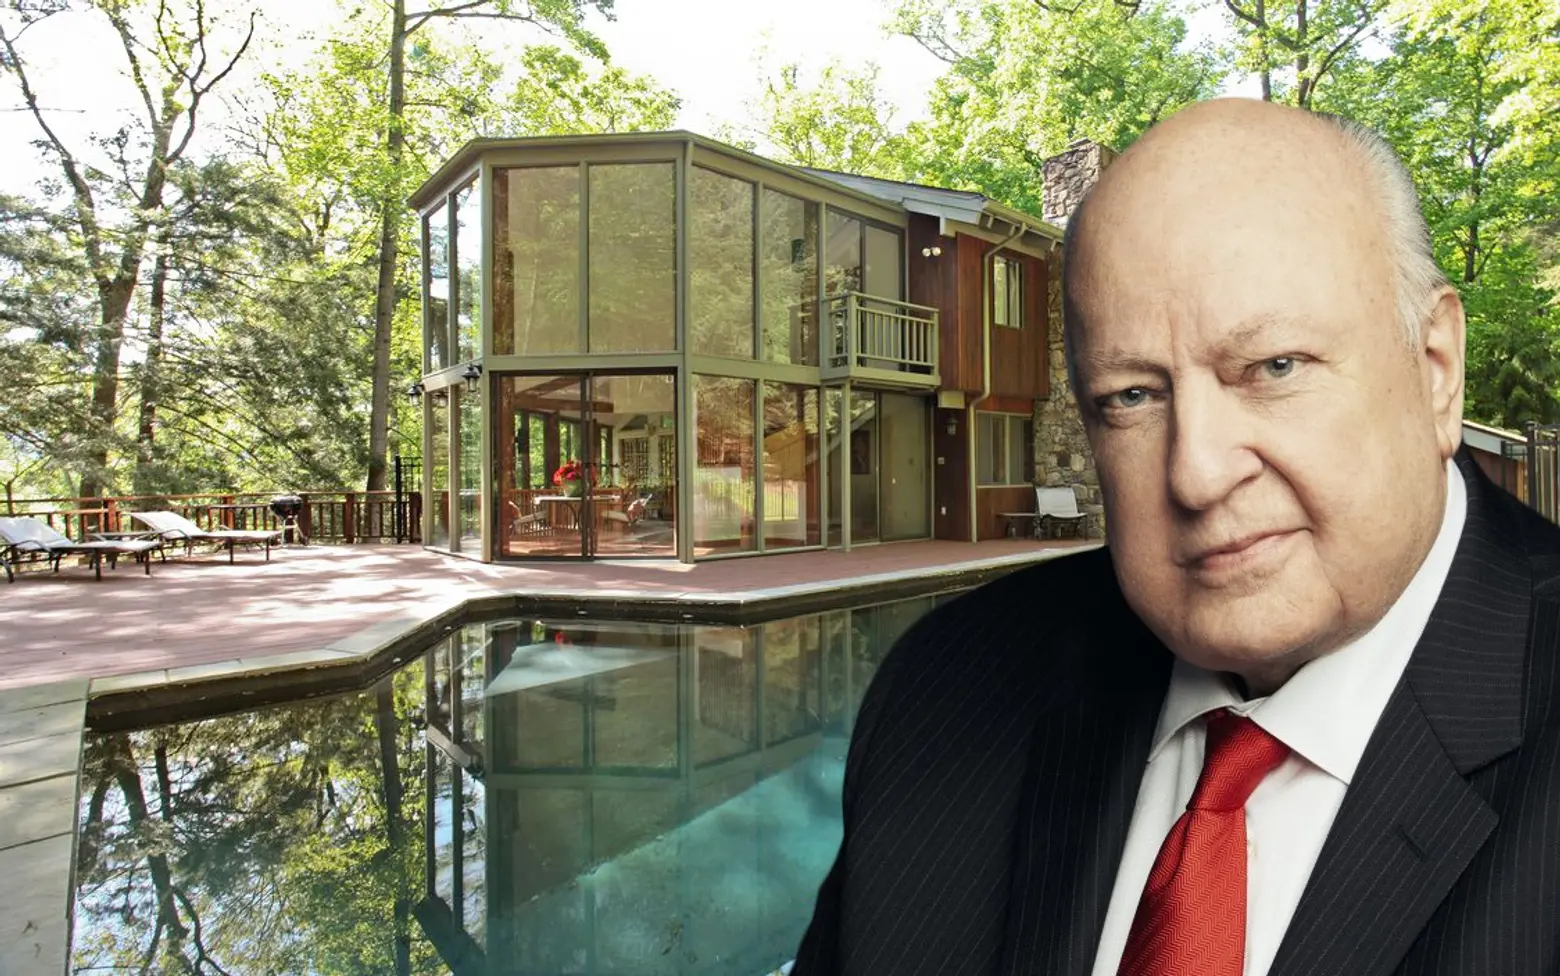 Ex-Fox News chair Roger Ailes tries to sell two Hudson Valley homes at a $1M+ loss